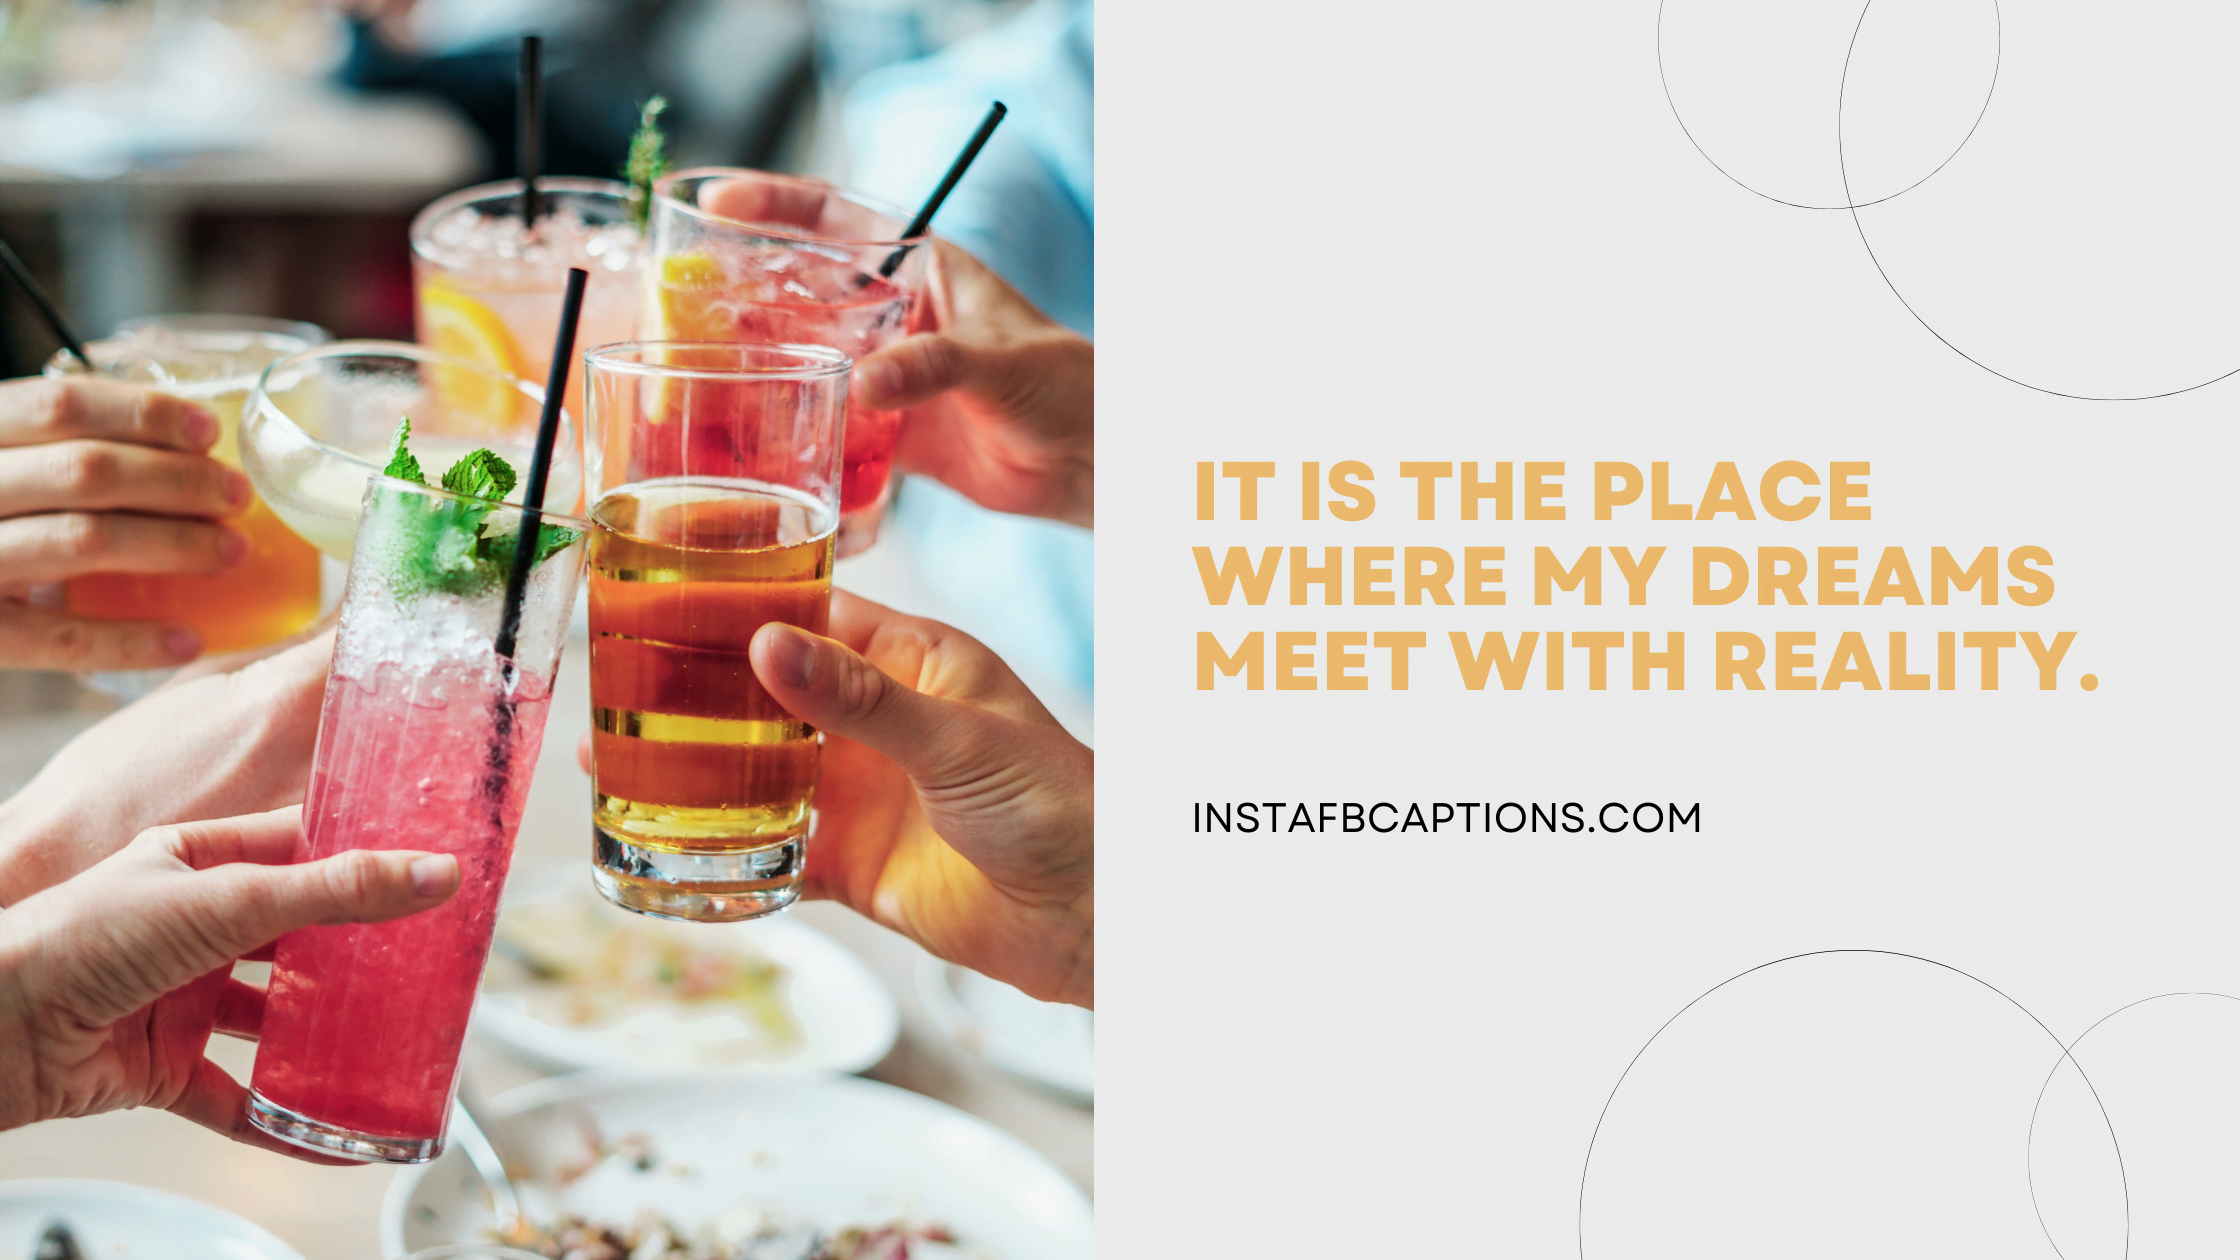 Had A Meal With Friends Restaurant Captions  - Had a Meal with Friends  Restaurant Captions - [New] Restaurant Captions for Instagram in 2023